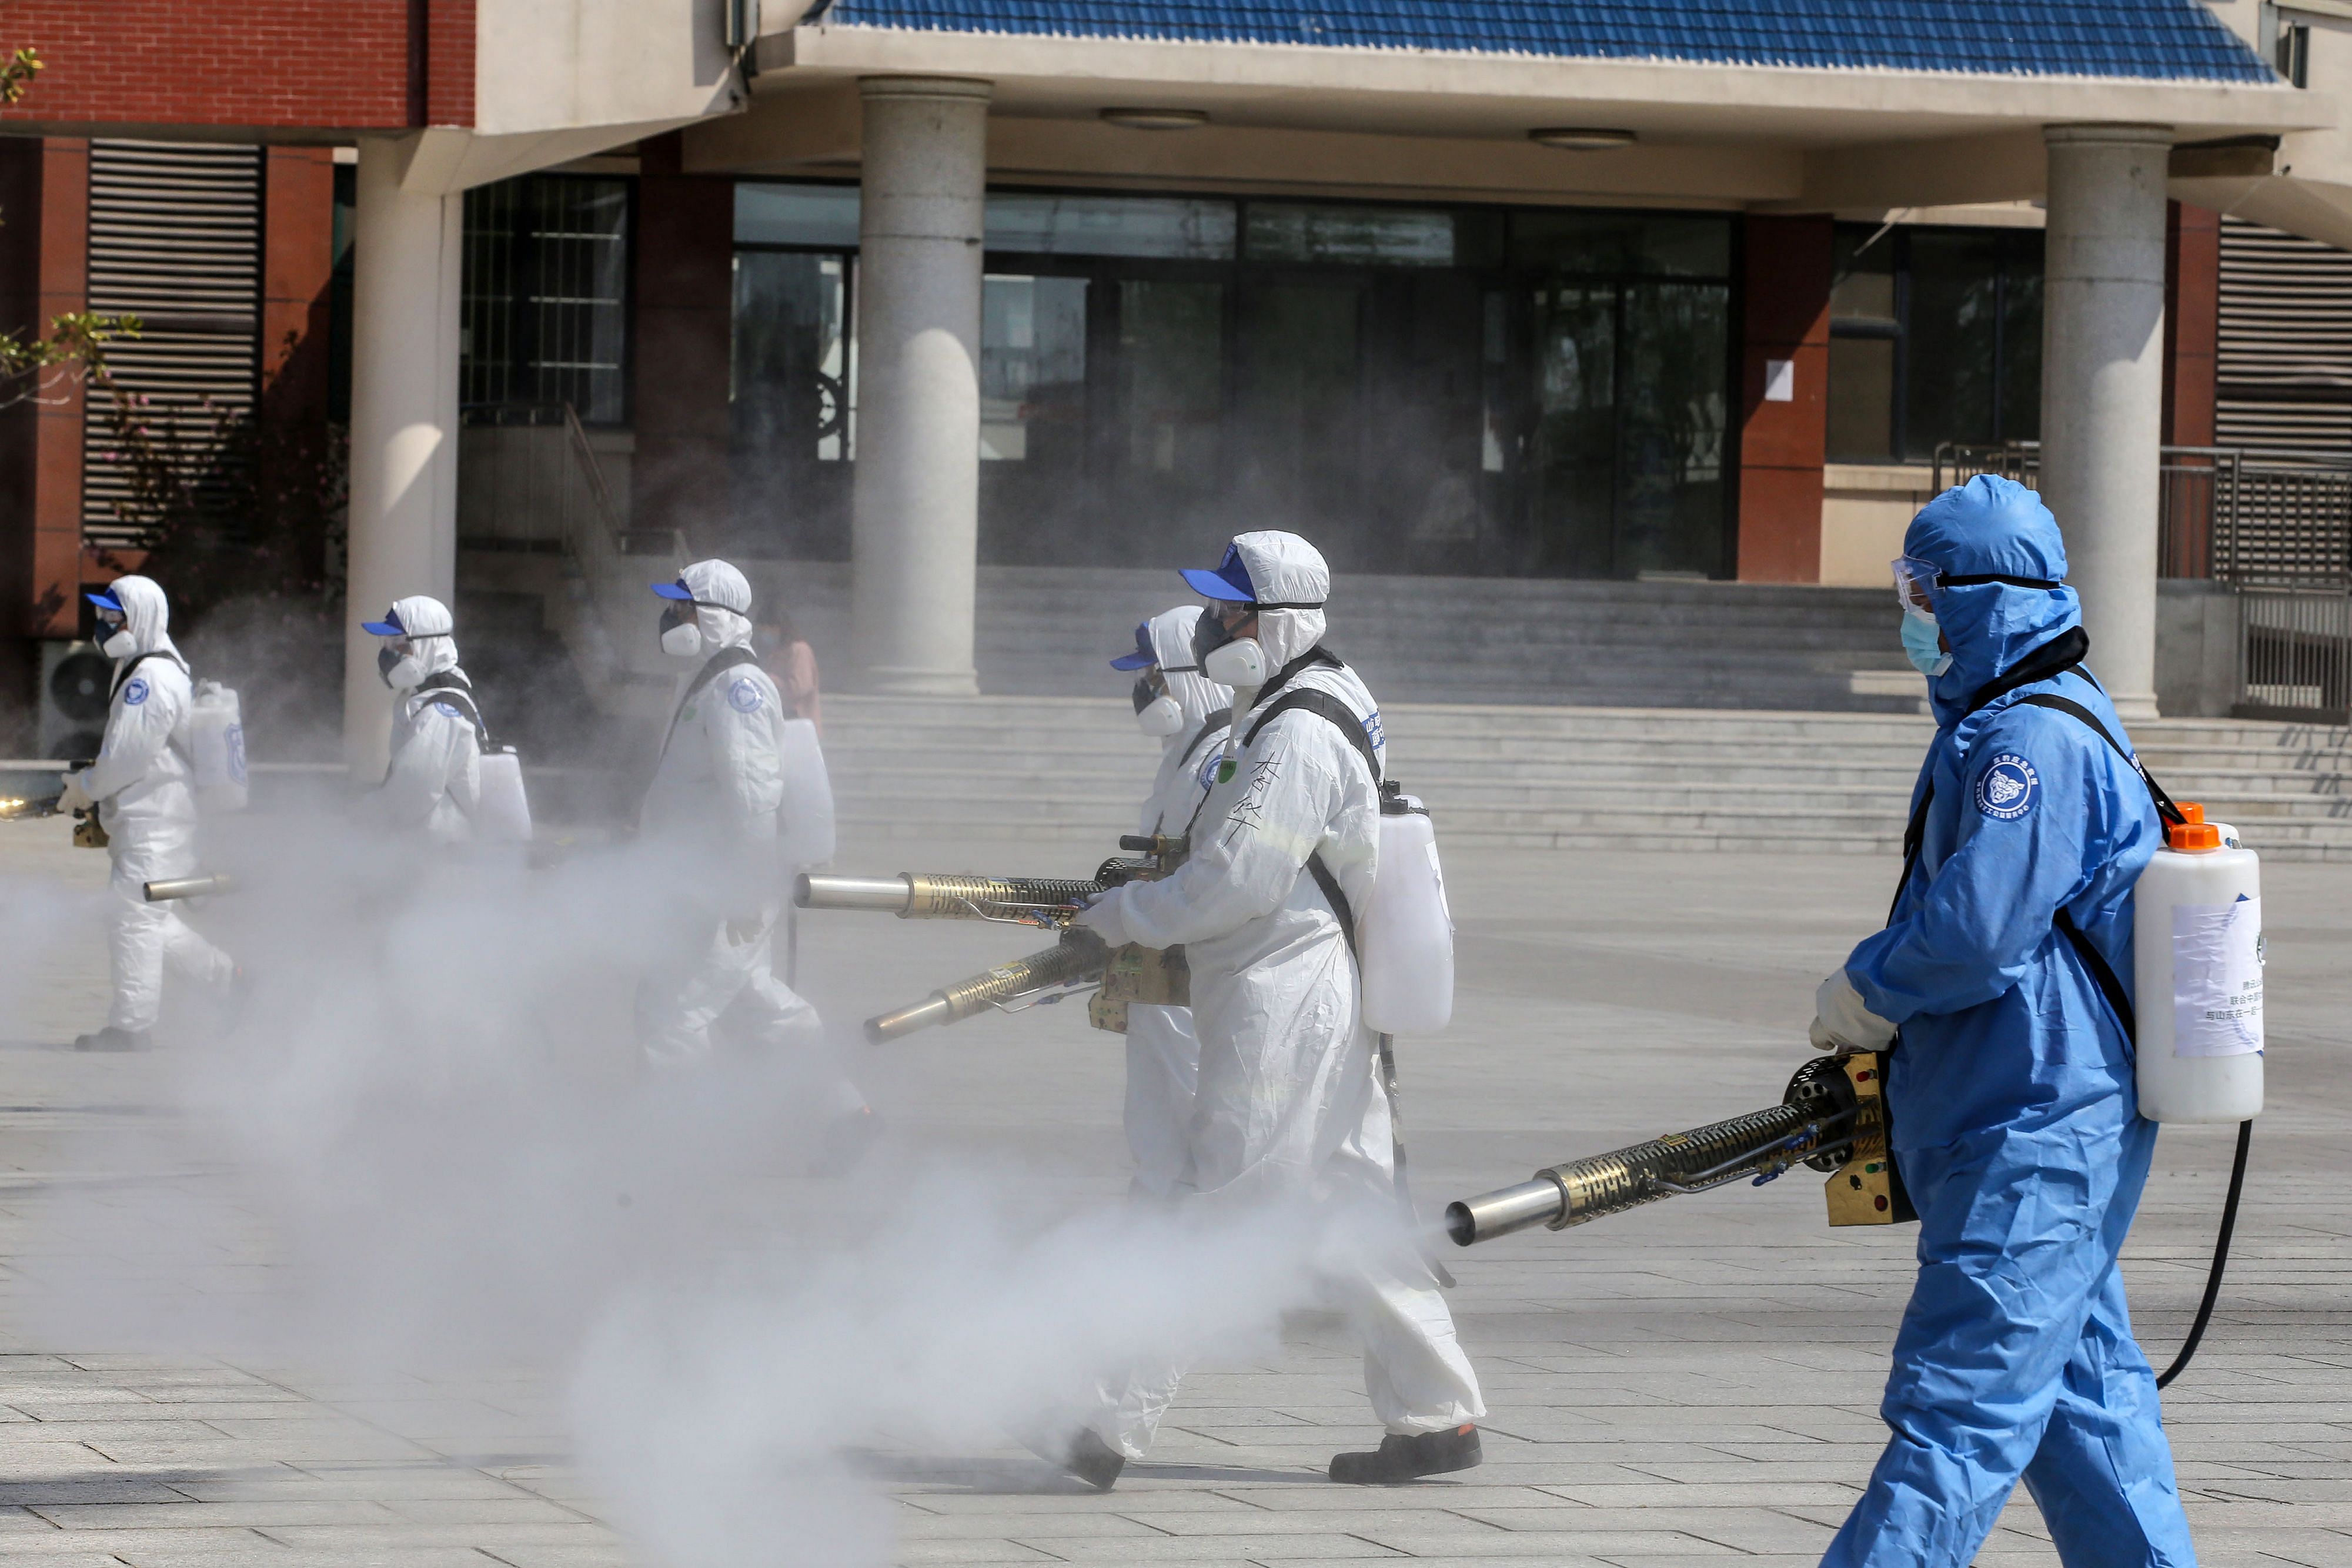 Volunteers spraying disinfectant in the compounds of a school as it prepares to reopen after the term opening was delayed due to the COVID-19 coronavirus outbreak, in Weifang in China's eastern Shandong province. (AFP Photo)